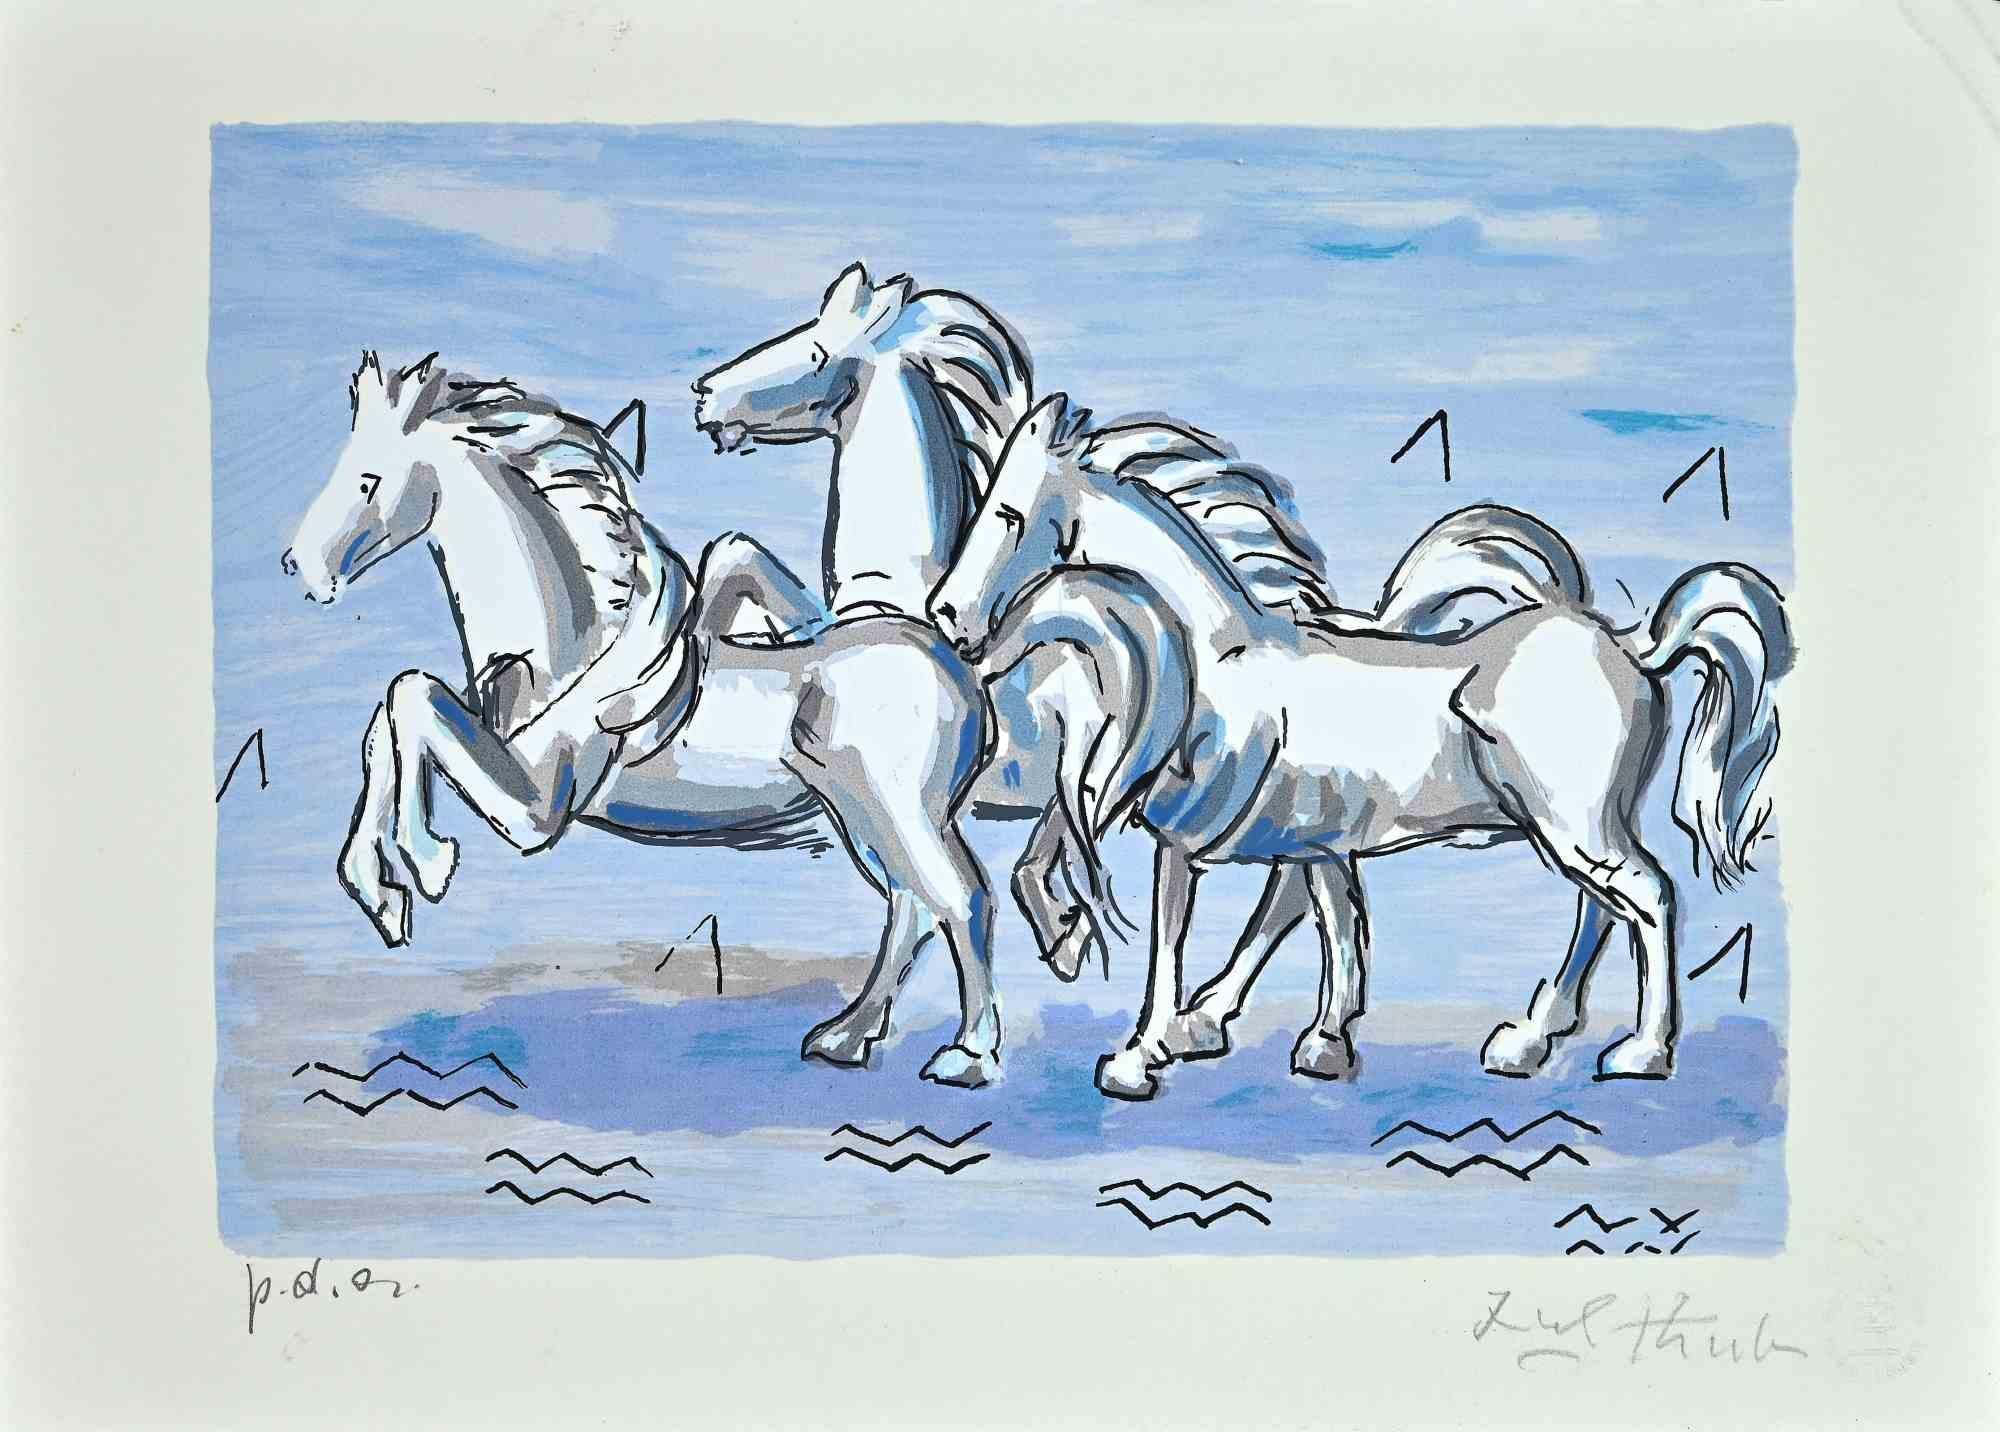 Horses is an original Litograph realized by Ibrahim Kodra in 1974.

Very good condition on a white cardboard. Artist Proof.

Hand signed with pencil by the artist on the lower right corner.

Prov.: Studio d’Arte Borromeo

Ibrahim Likmetaj Kodra (22